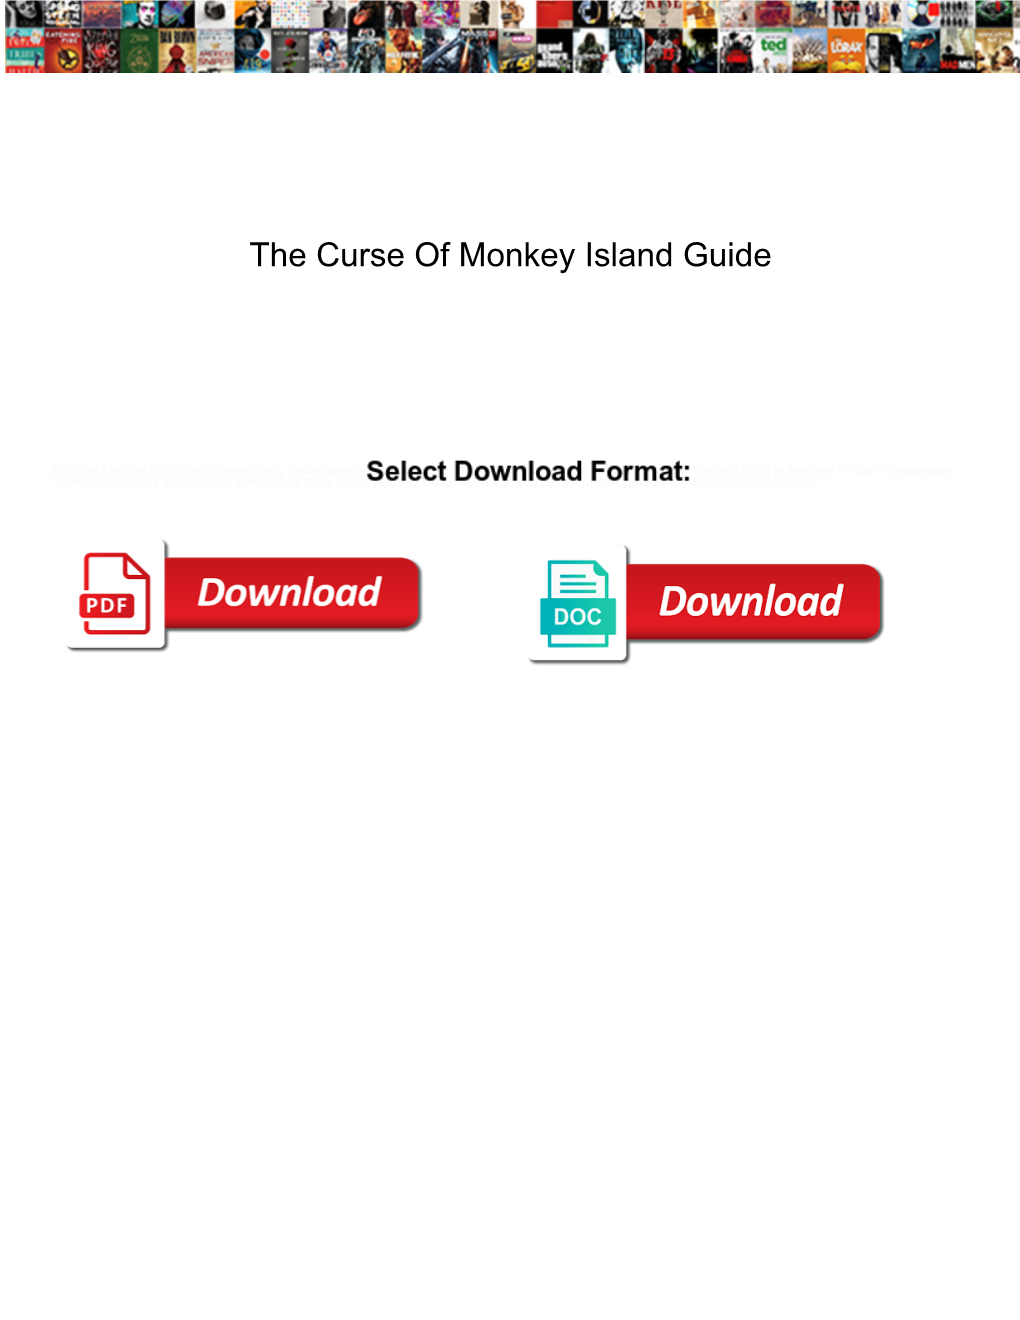 The Curse of Monkey Island Guide